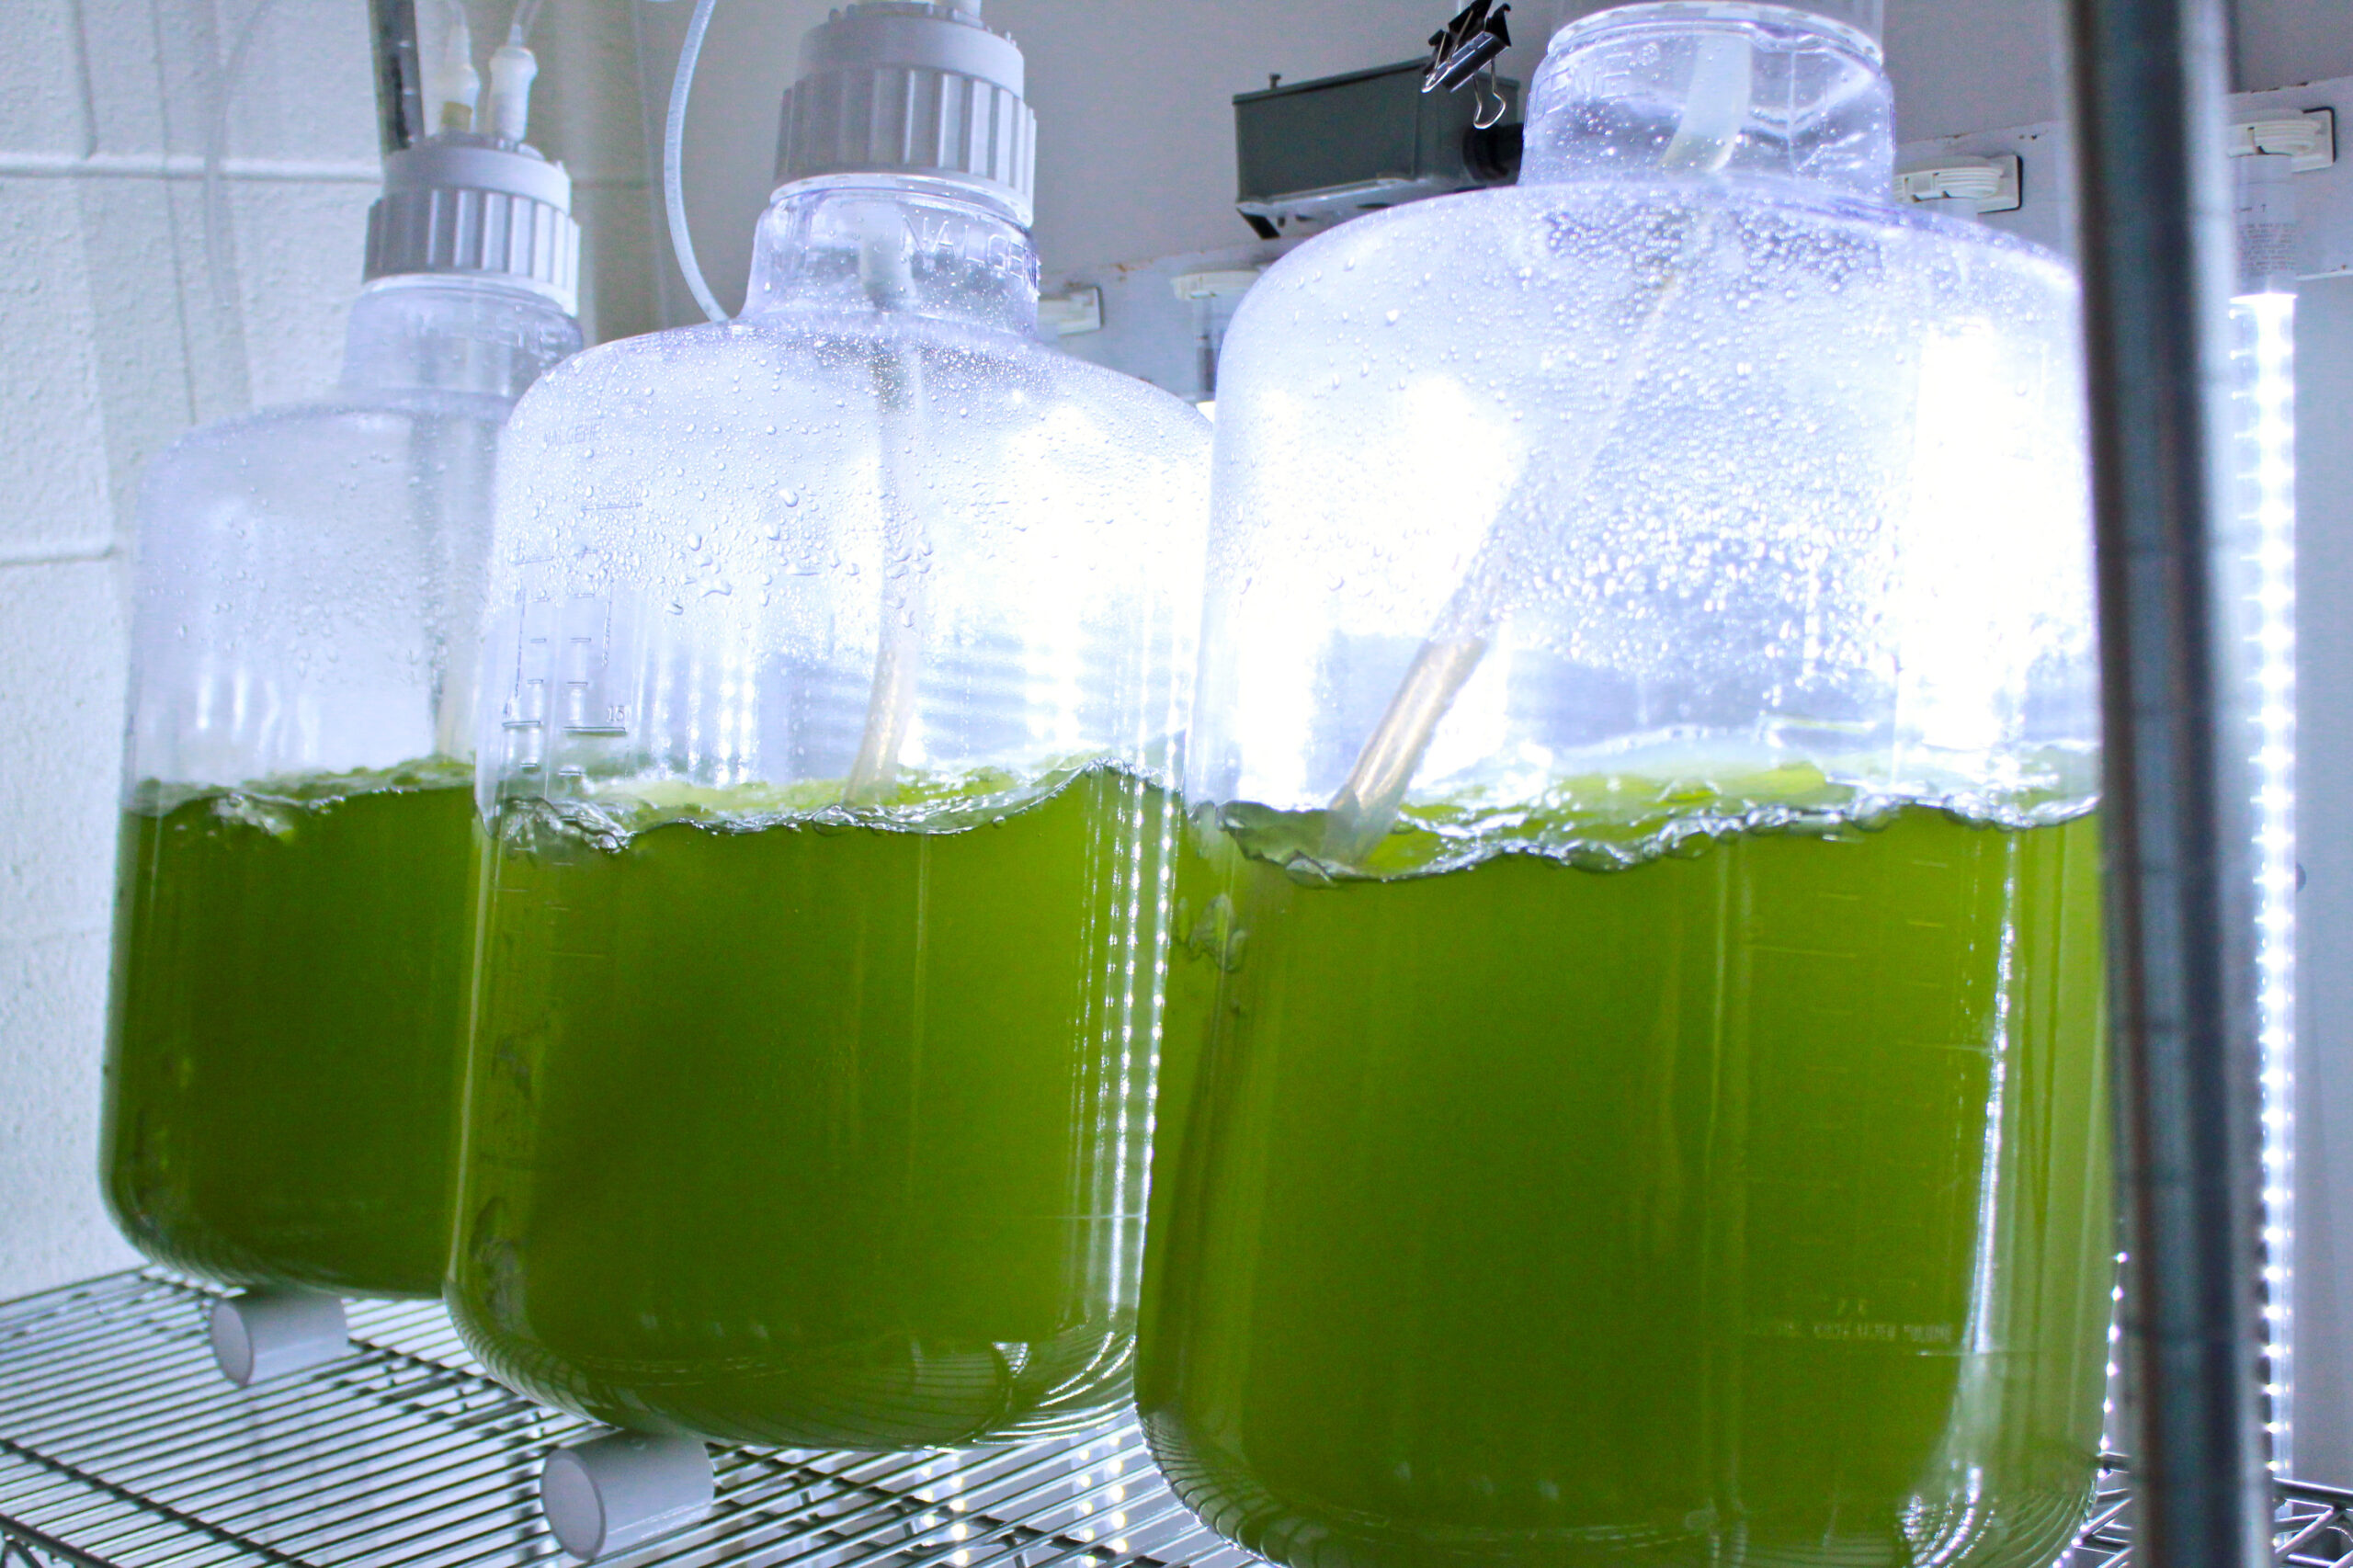 Large clear containers filled with green liquid